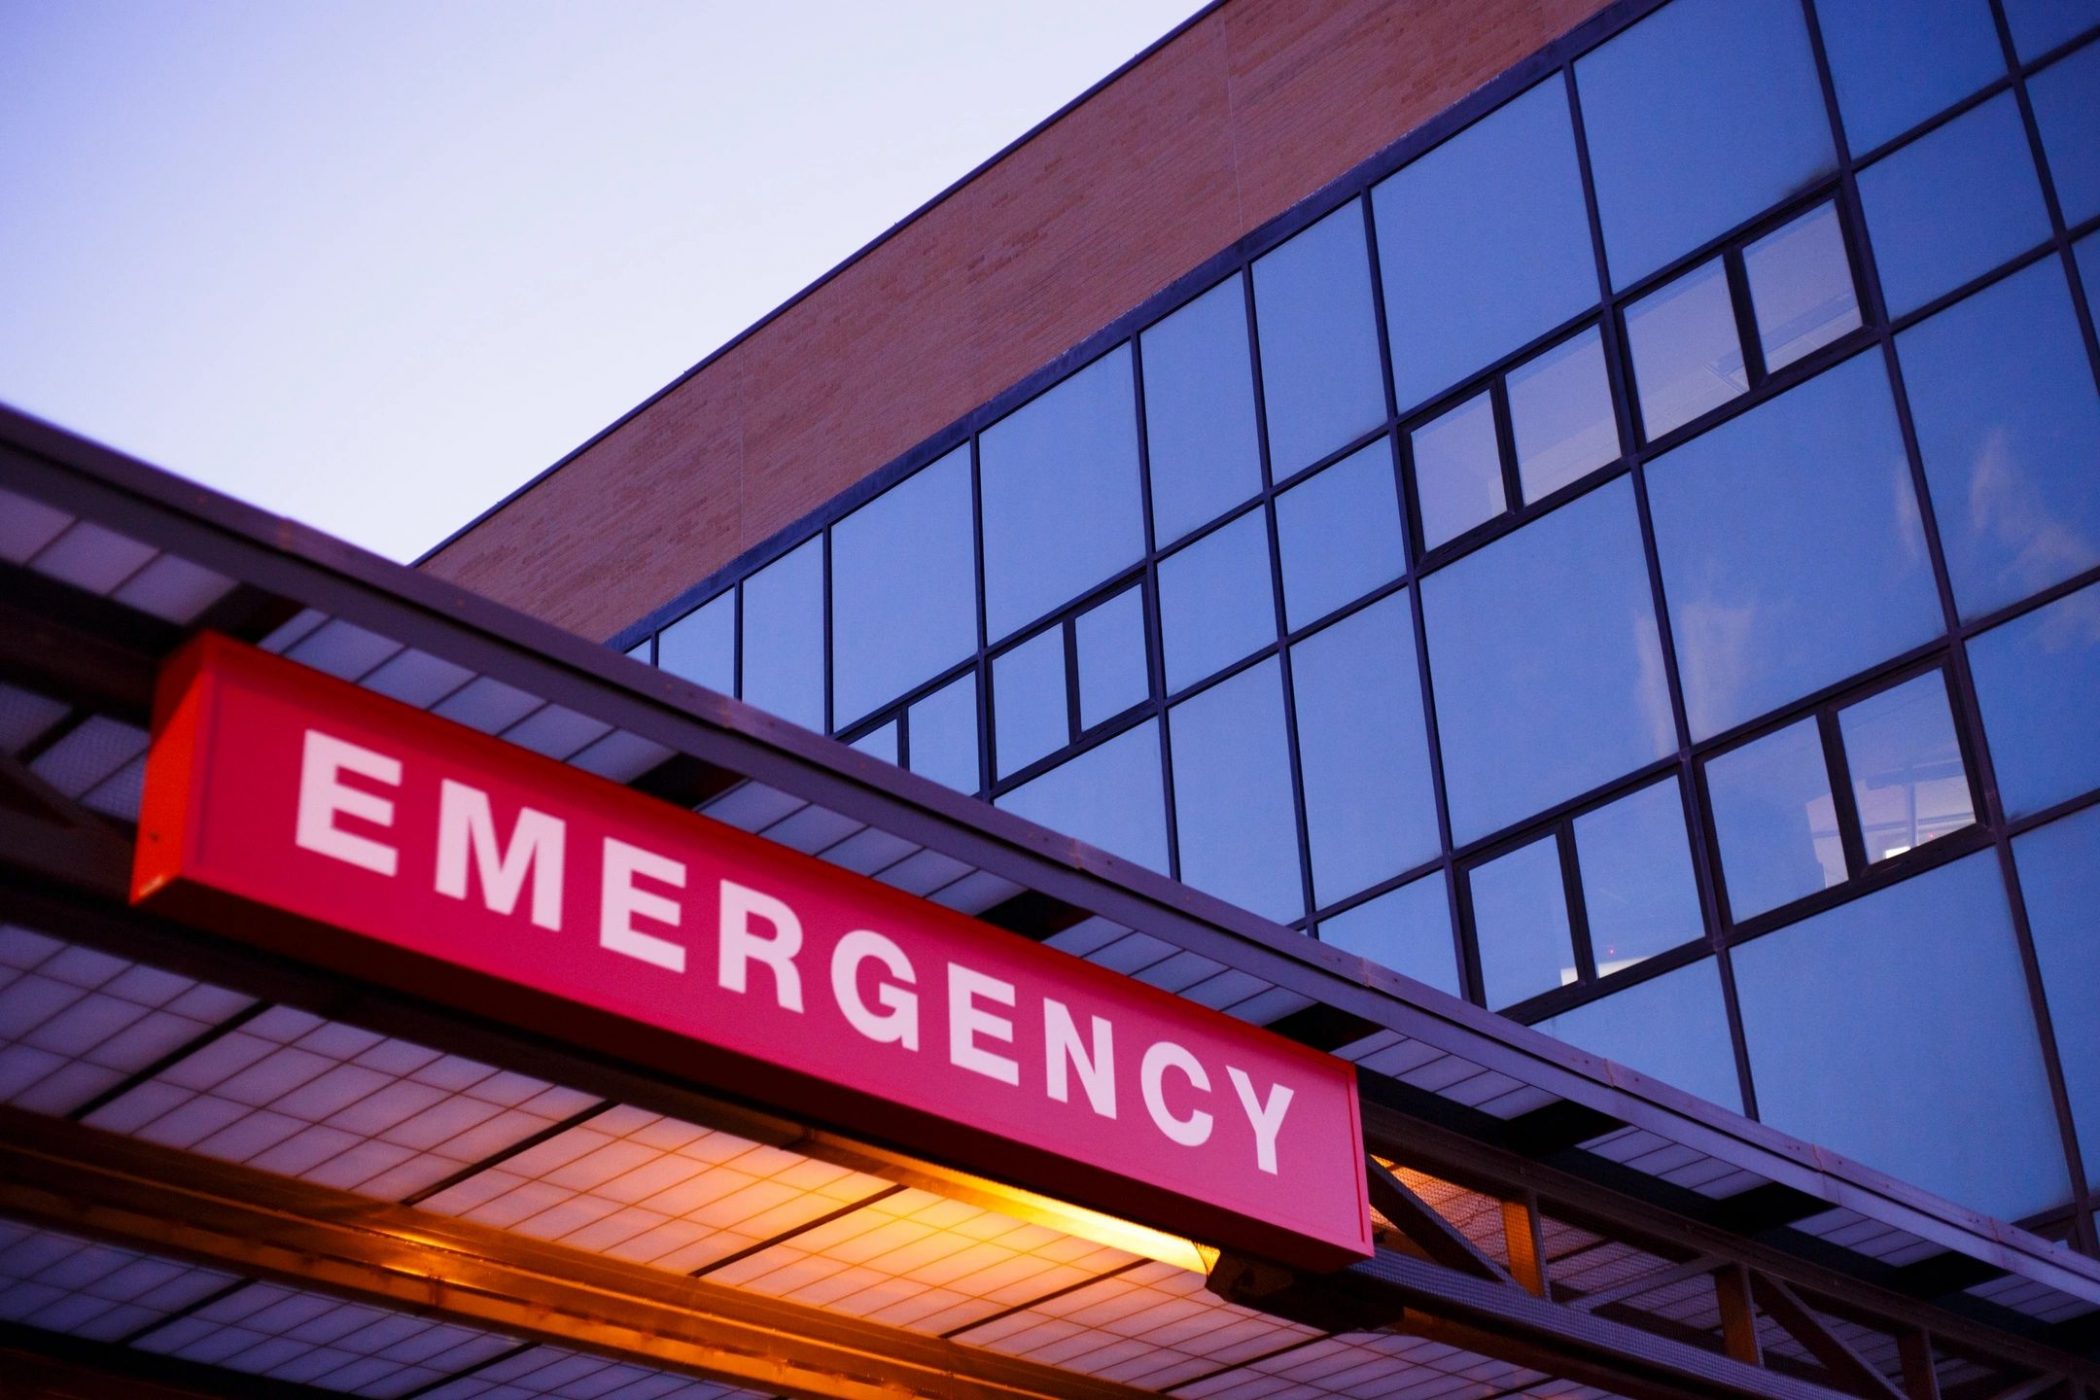 Emergency room sign like that described by DC widow blog writer Marjorie Brimley